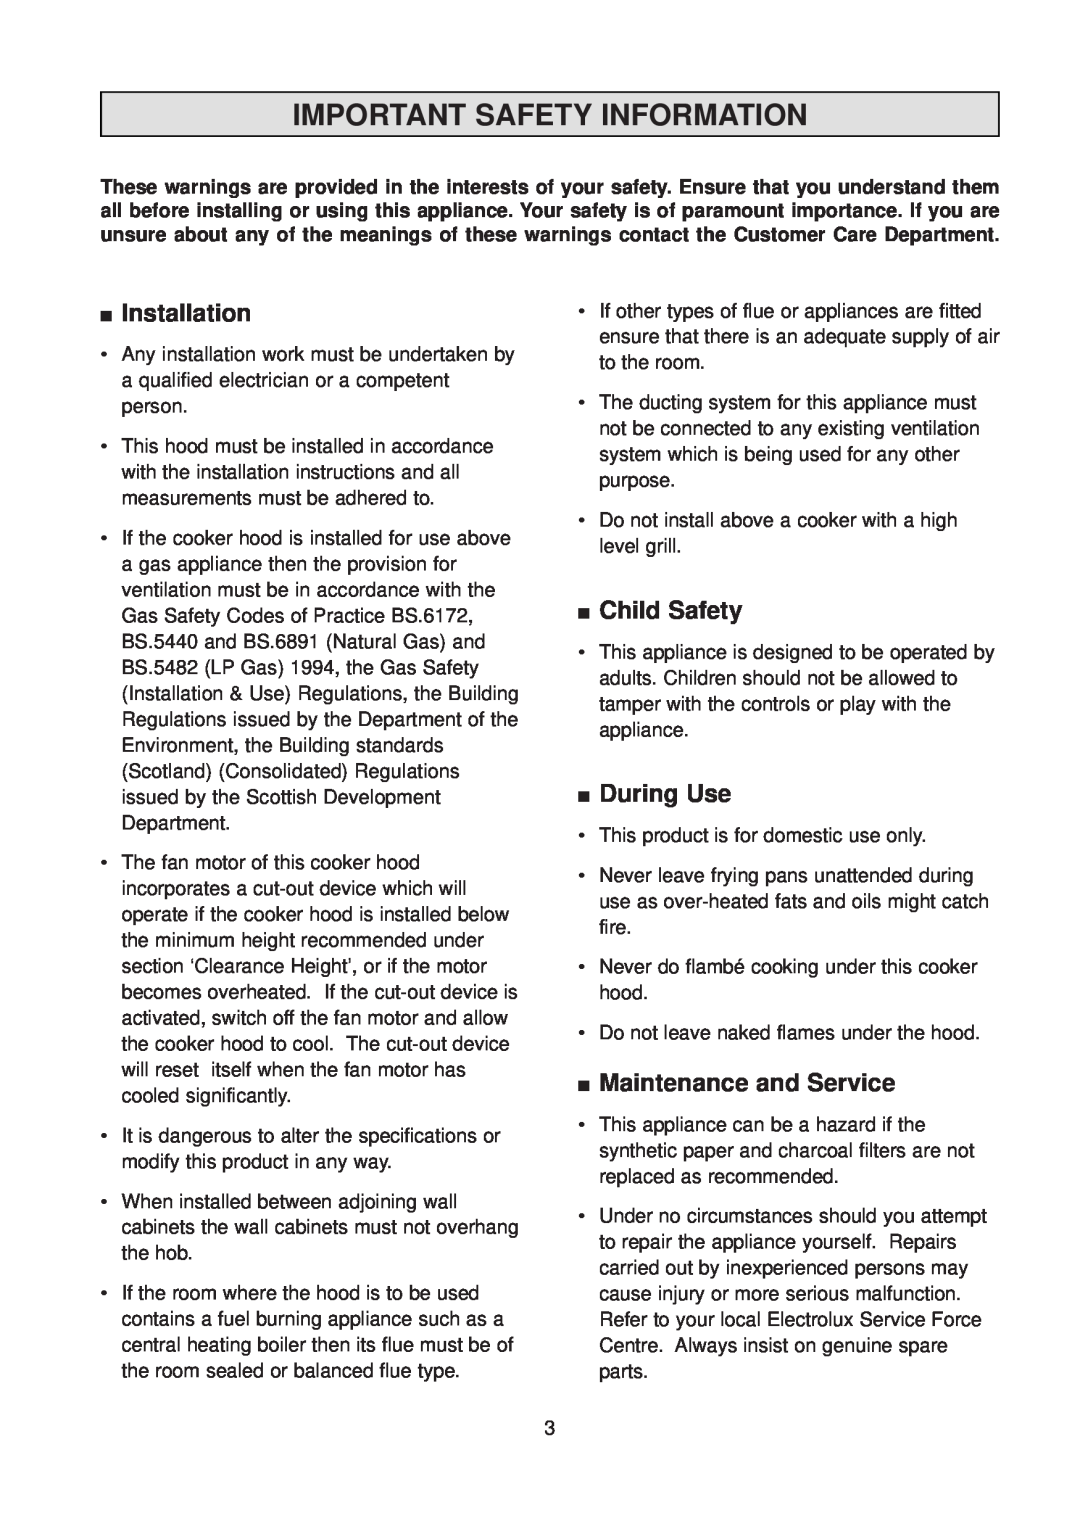 Electrolux EFC 630 manual Important Safety Information, Installation, Child Safety, During Use, Maintenance and Service 